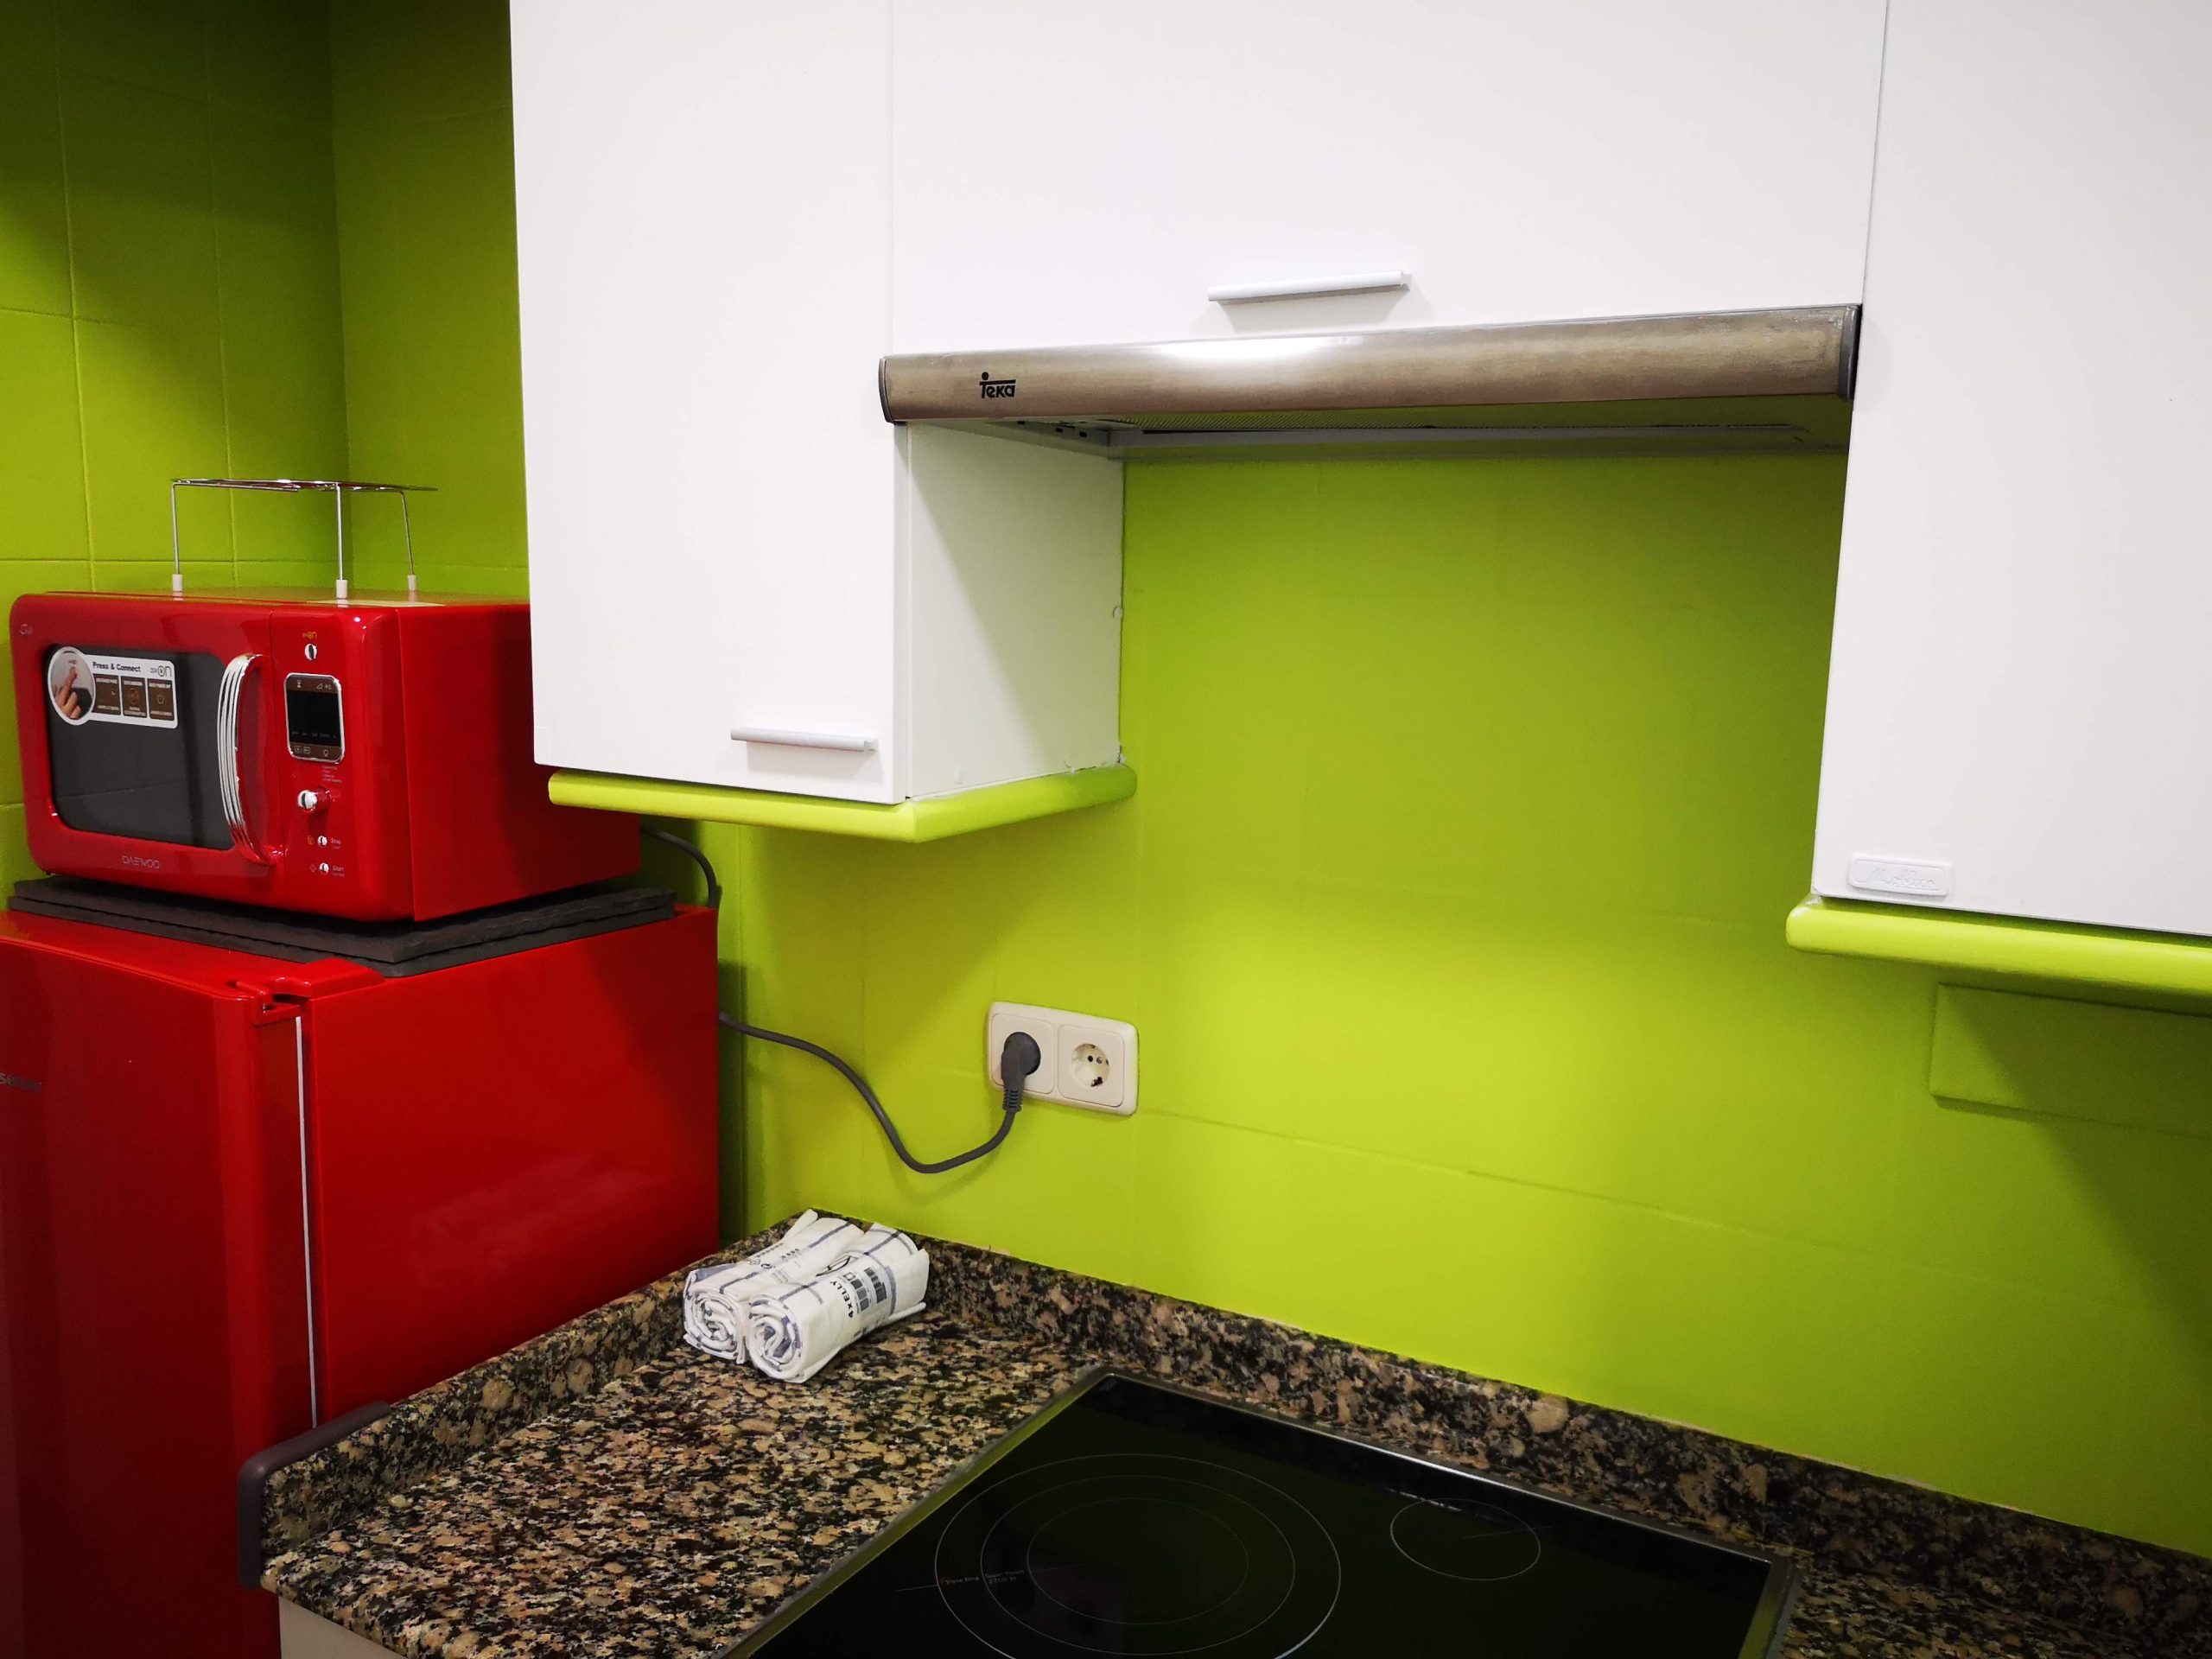 Aparment for rent in Valencia - kitchen